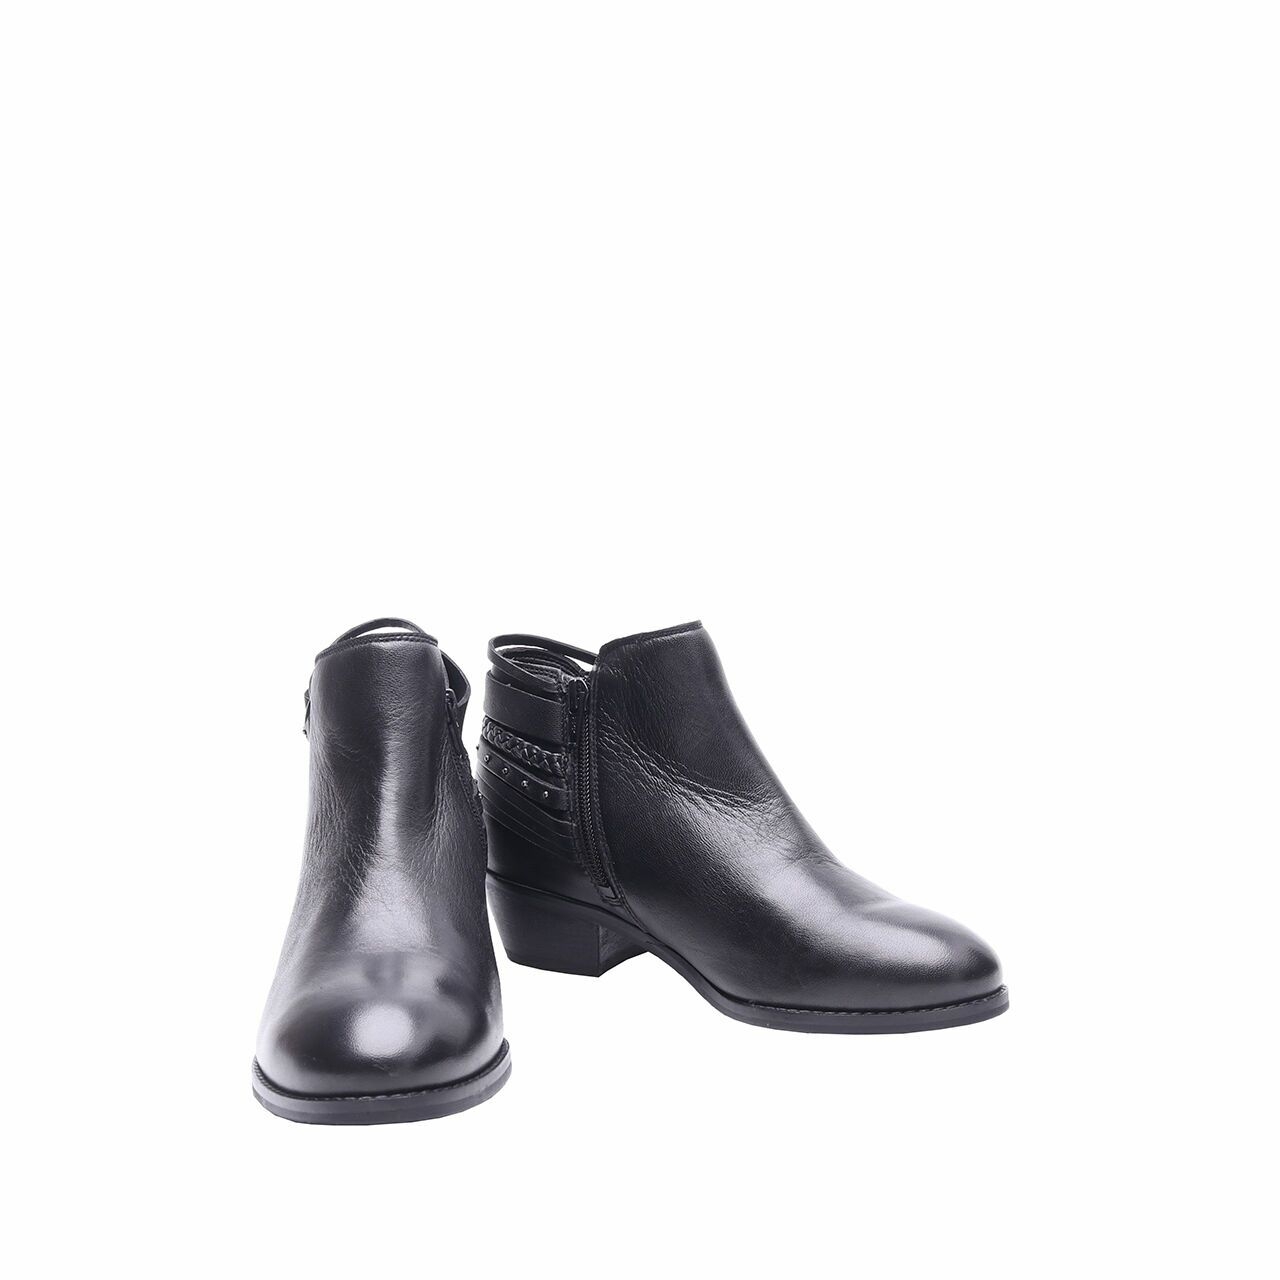 Hush Puppies Black Leather Ankle Boots	